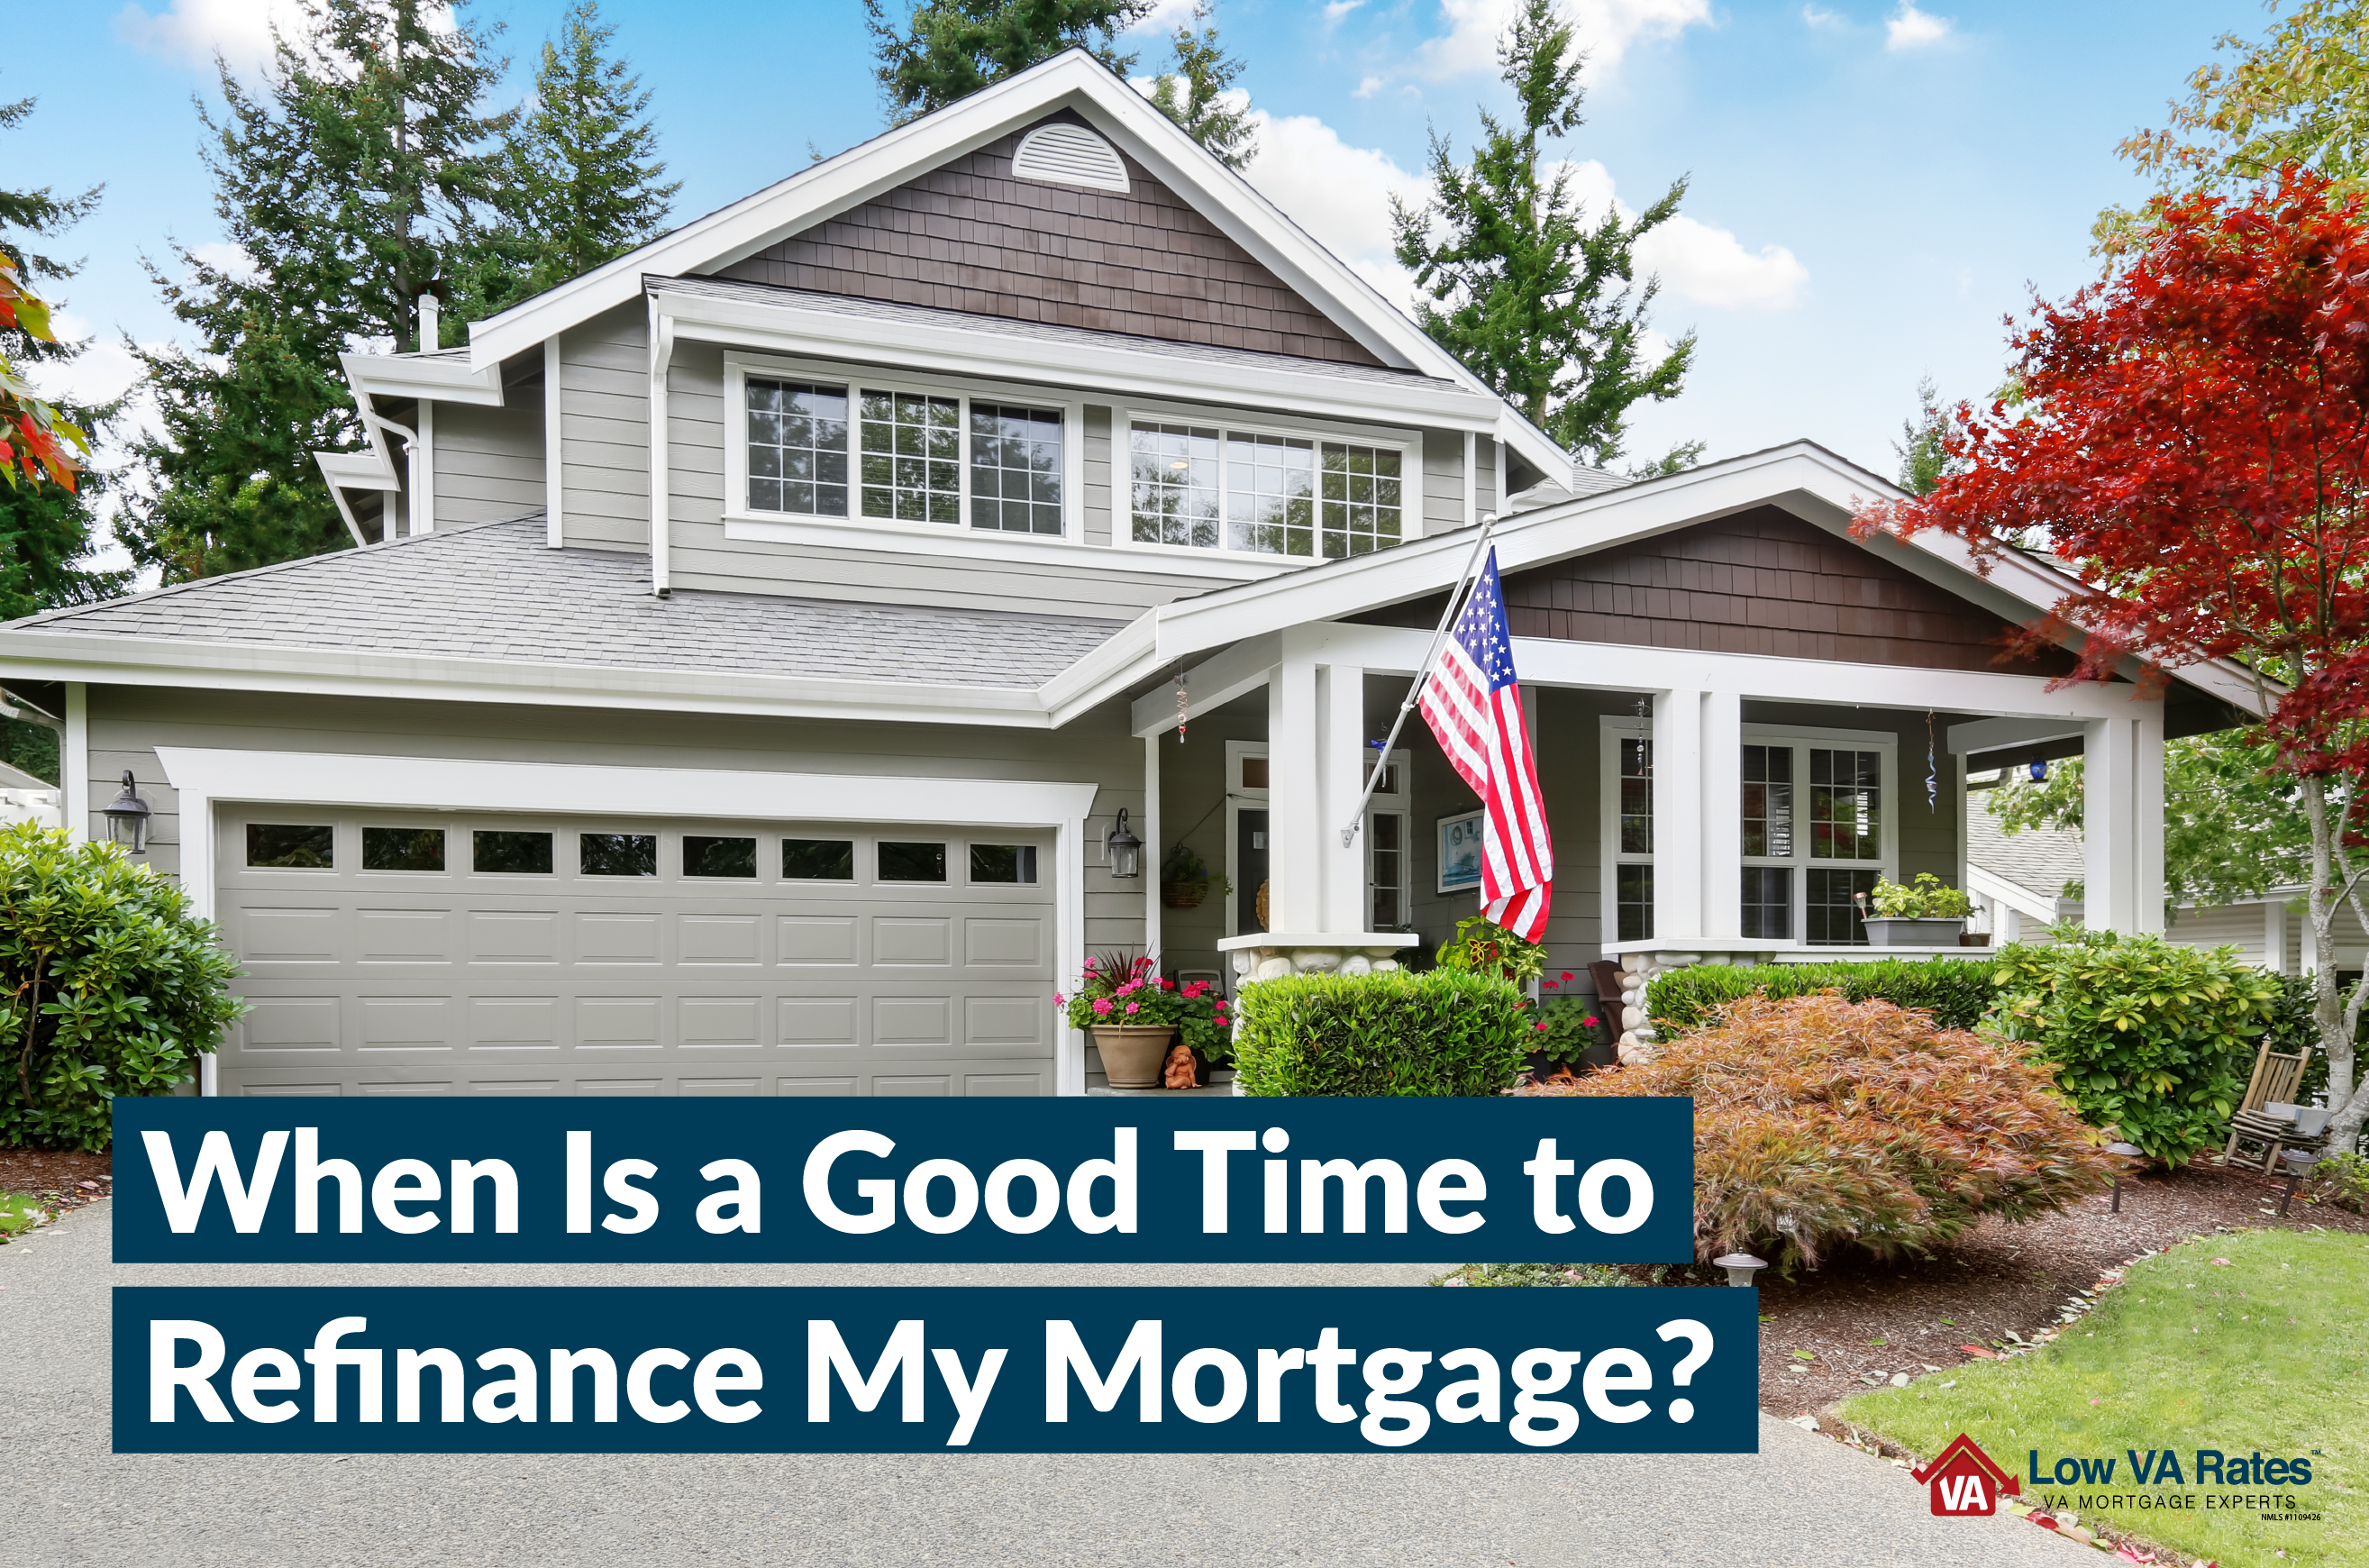 Picture of a home with a caption that says When Is a Good Time to Refinance My Mortgage?